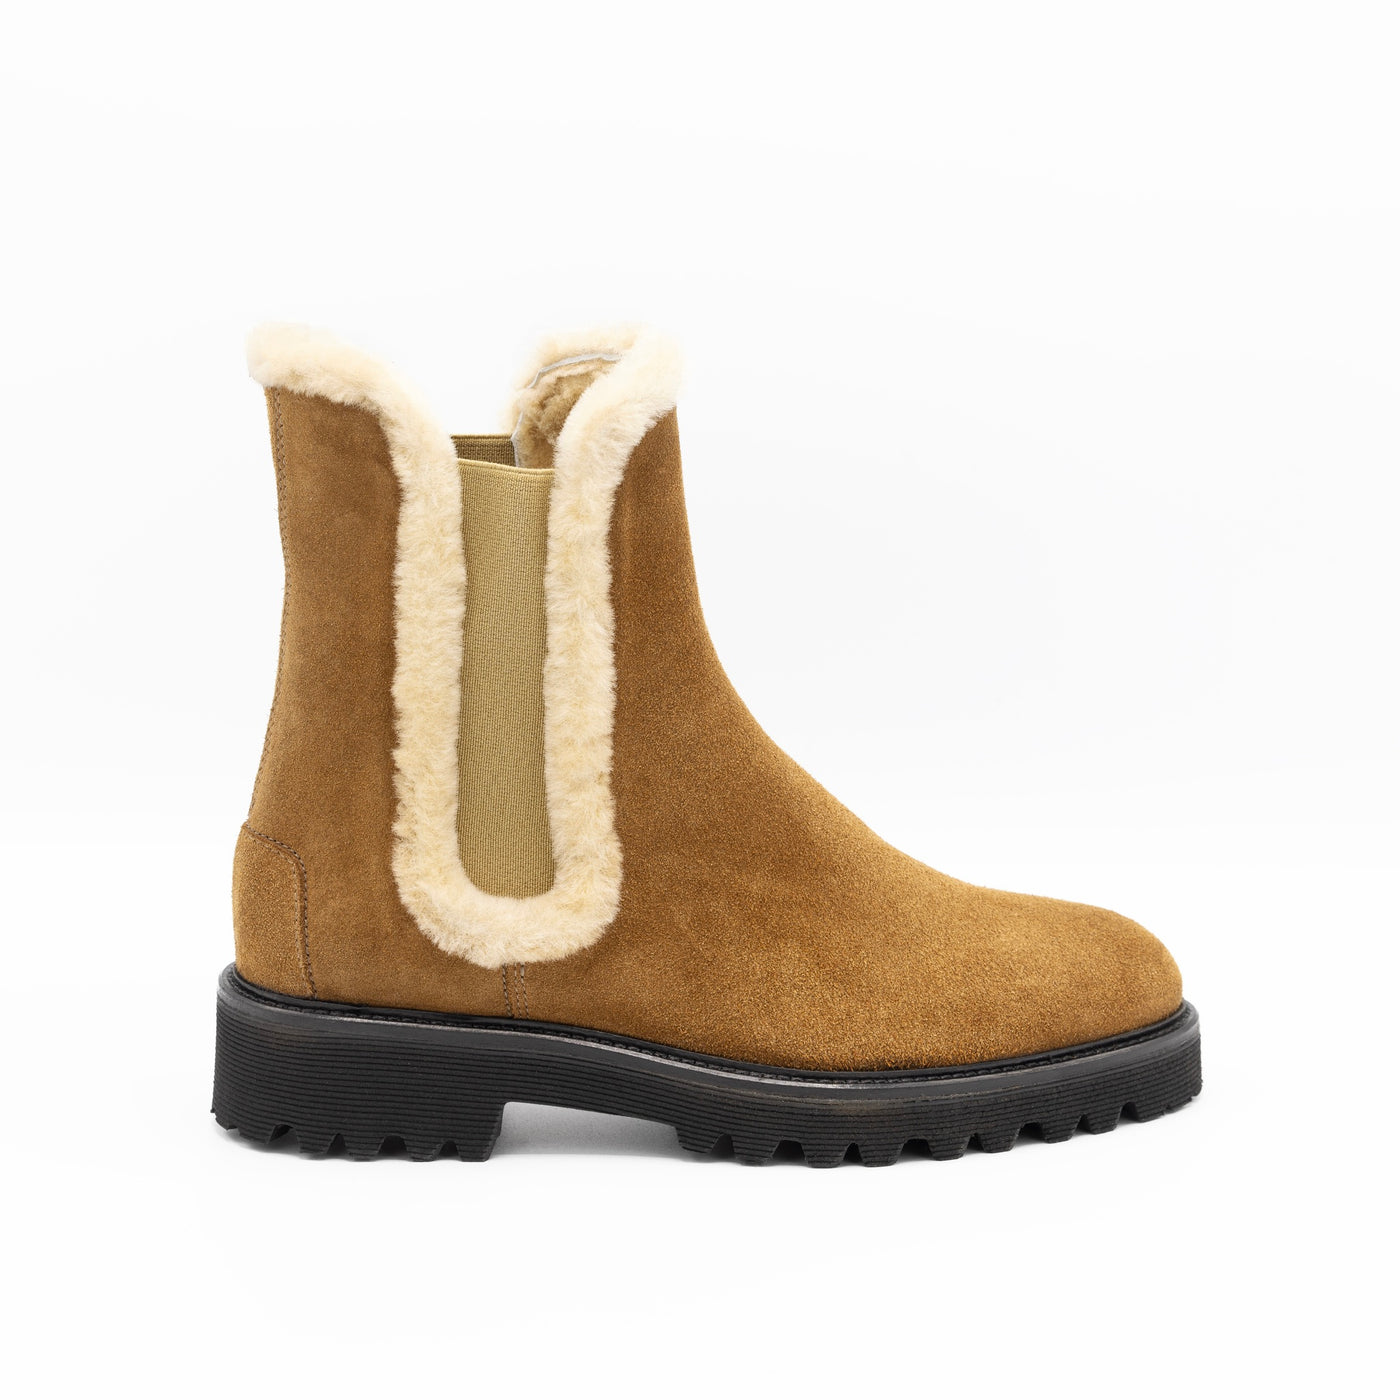 Light brown shearling trimmed Chelsea boots